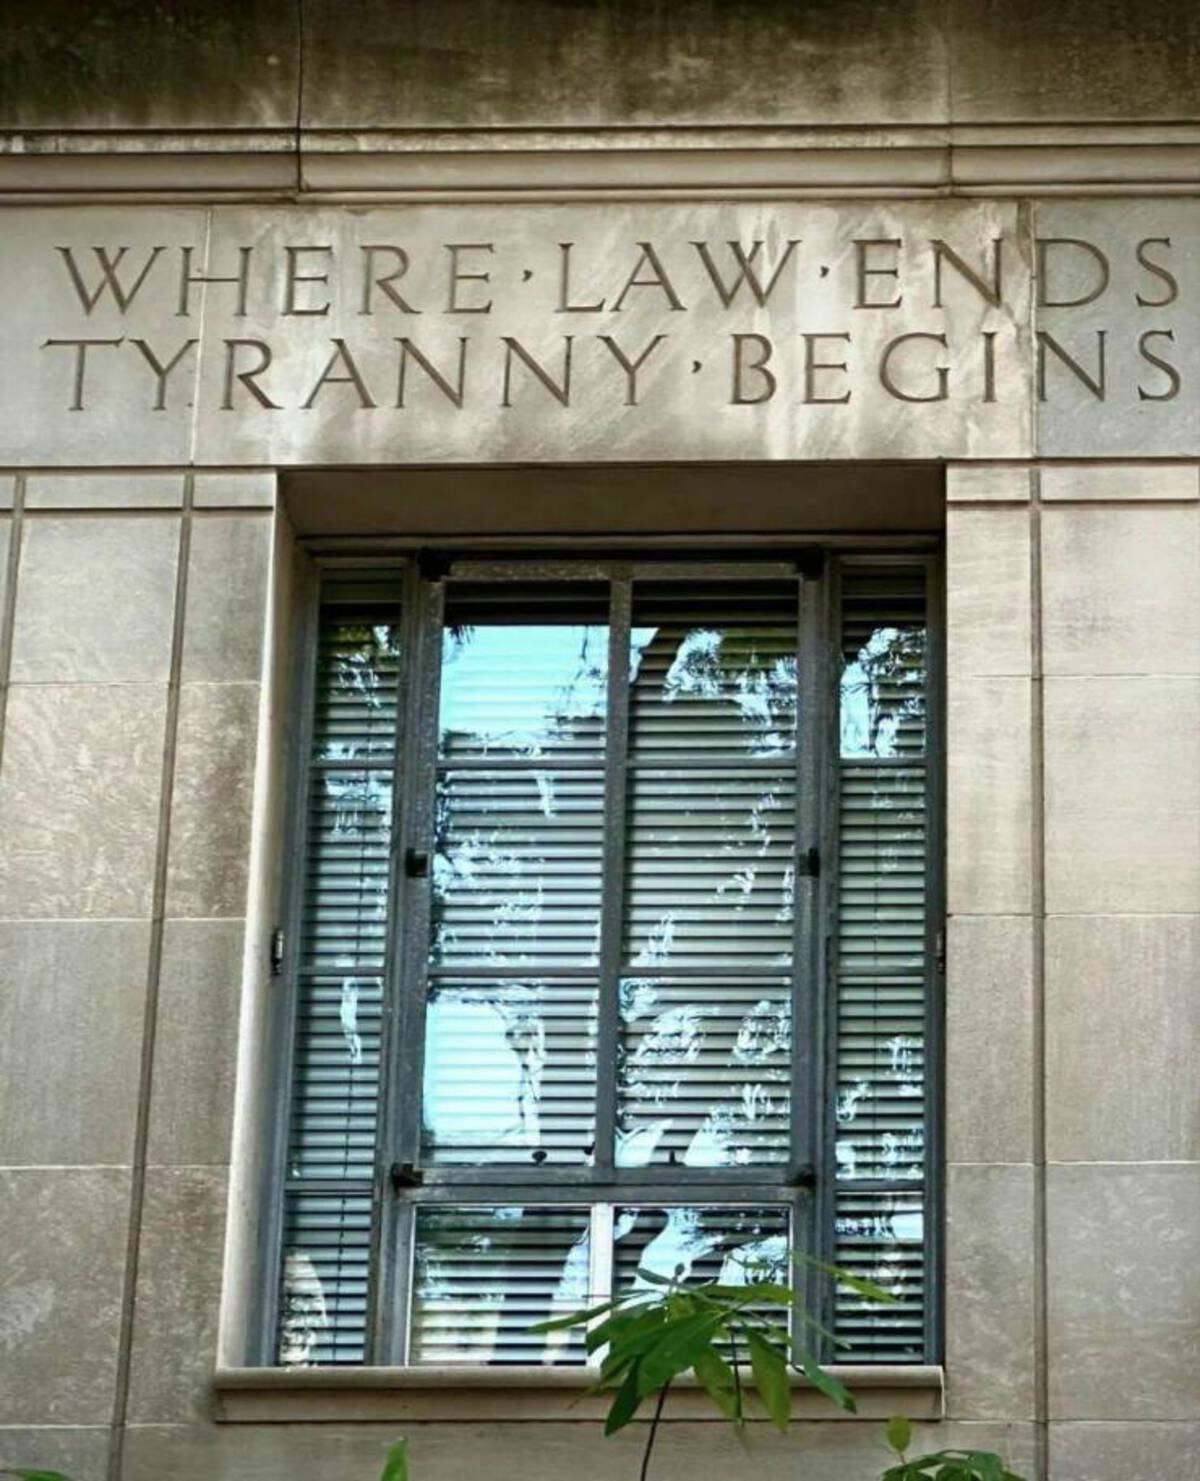 window - Where Law Ends Tyranny Begins